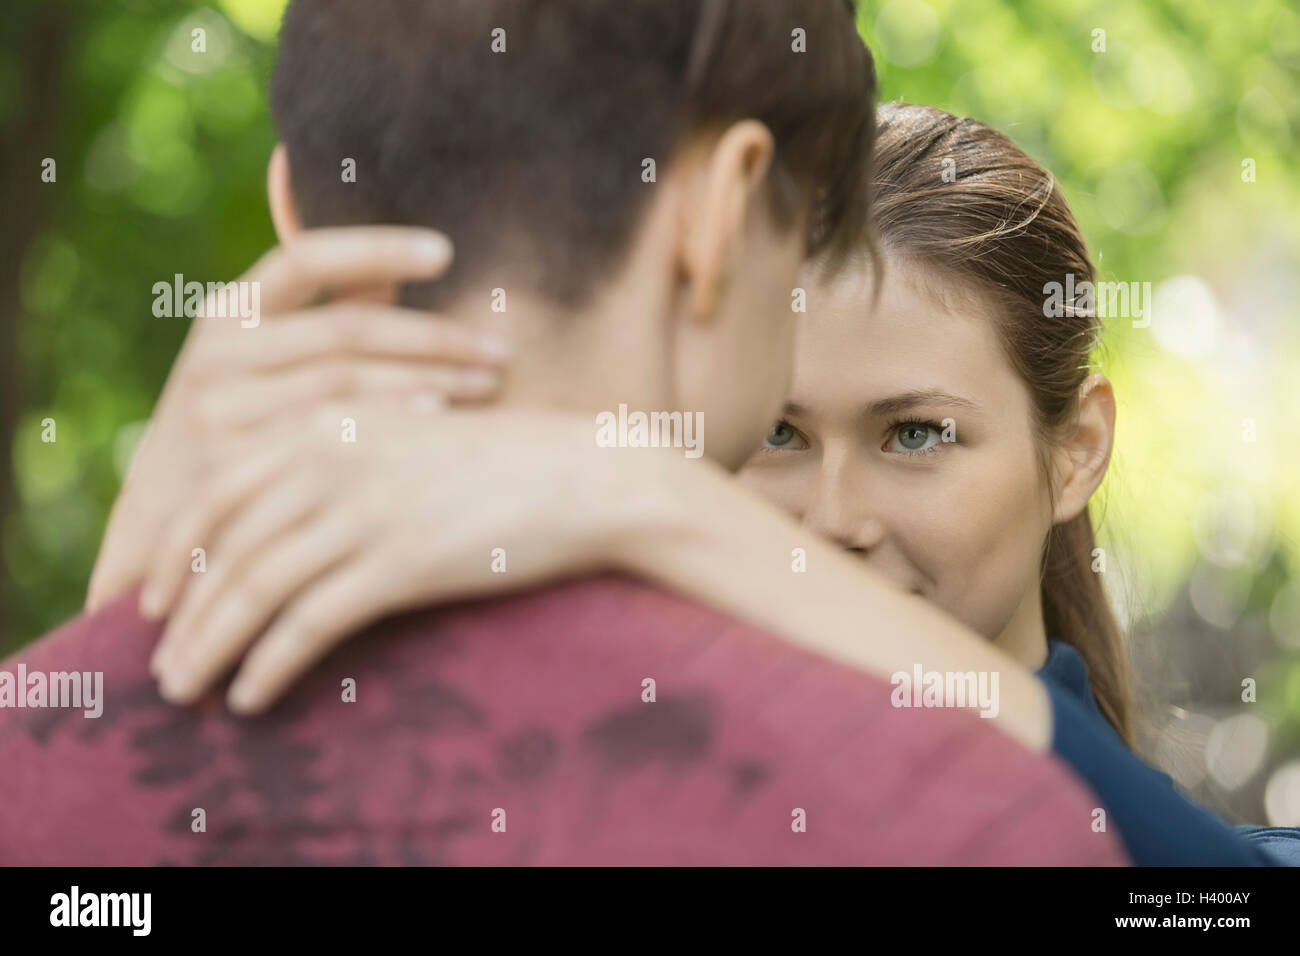 Woman looking at boyfriend while embracing in park Stock Photo